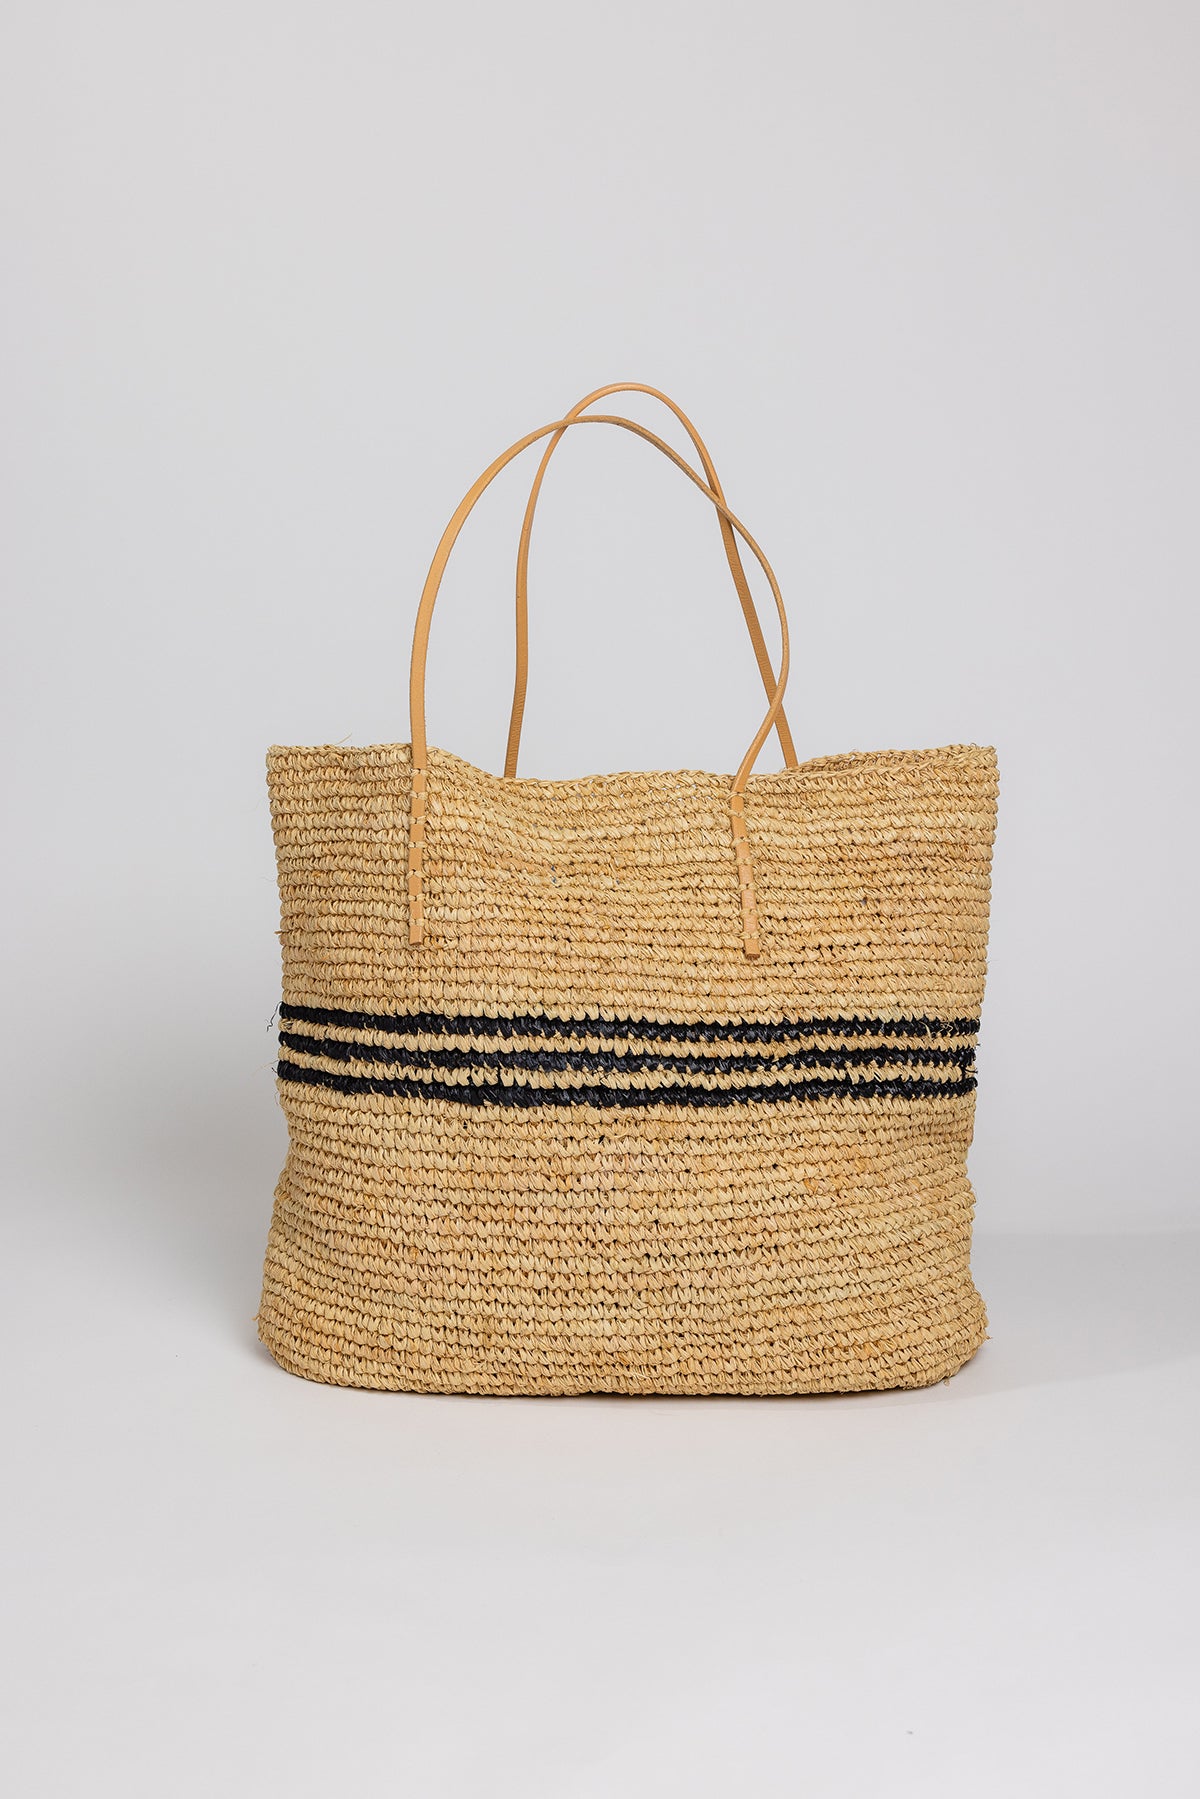 11 Woven and Straw Bags You Can Take From The Beach to The City